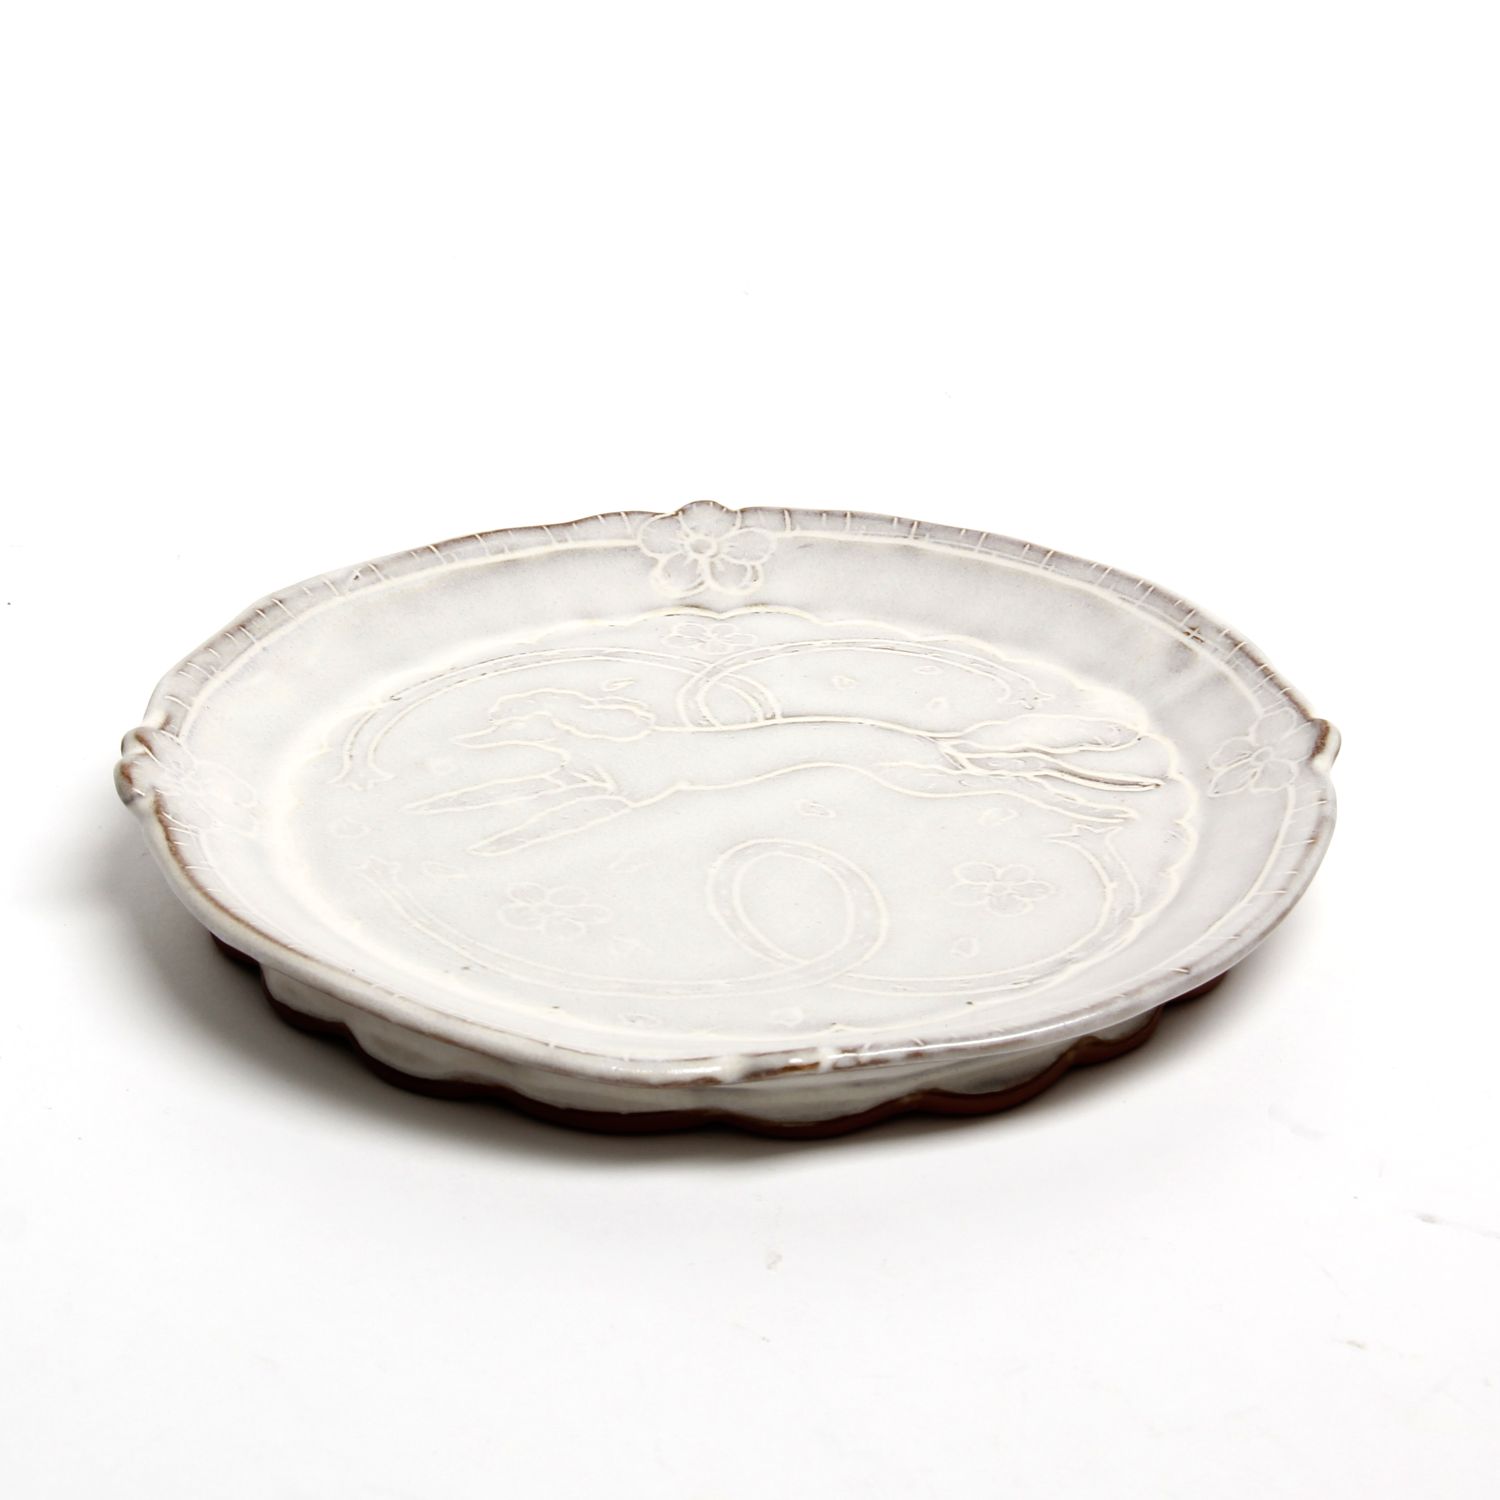 Zoe Pinnell: Small White Poodle Plate Product Image 3 of 3